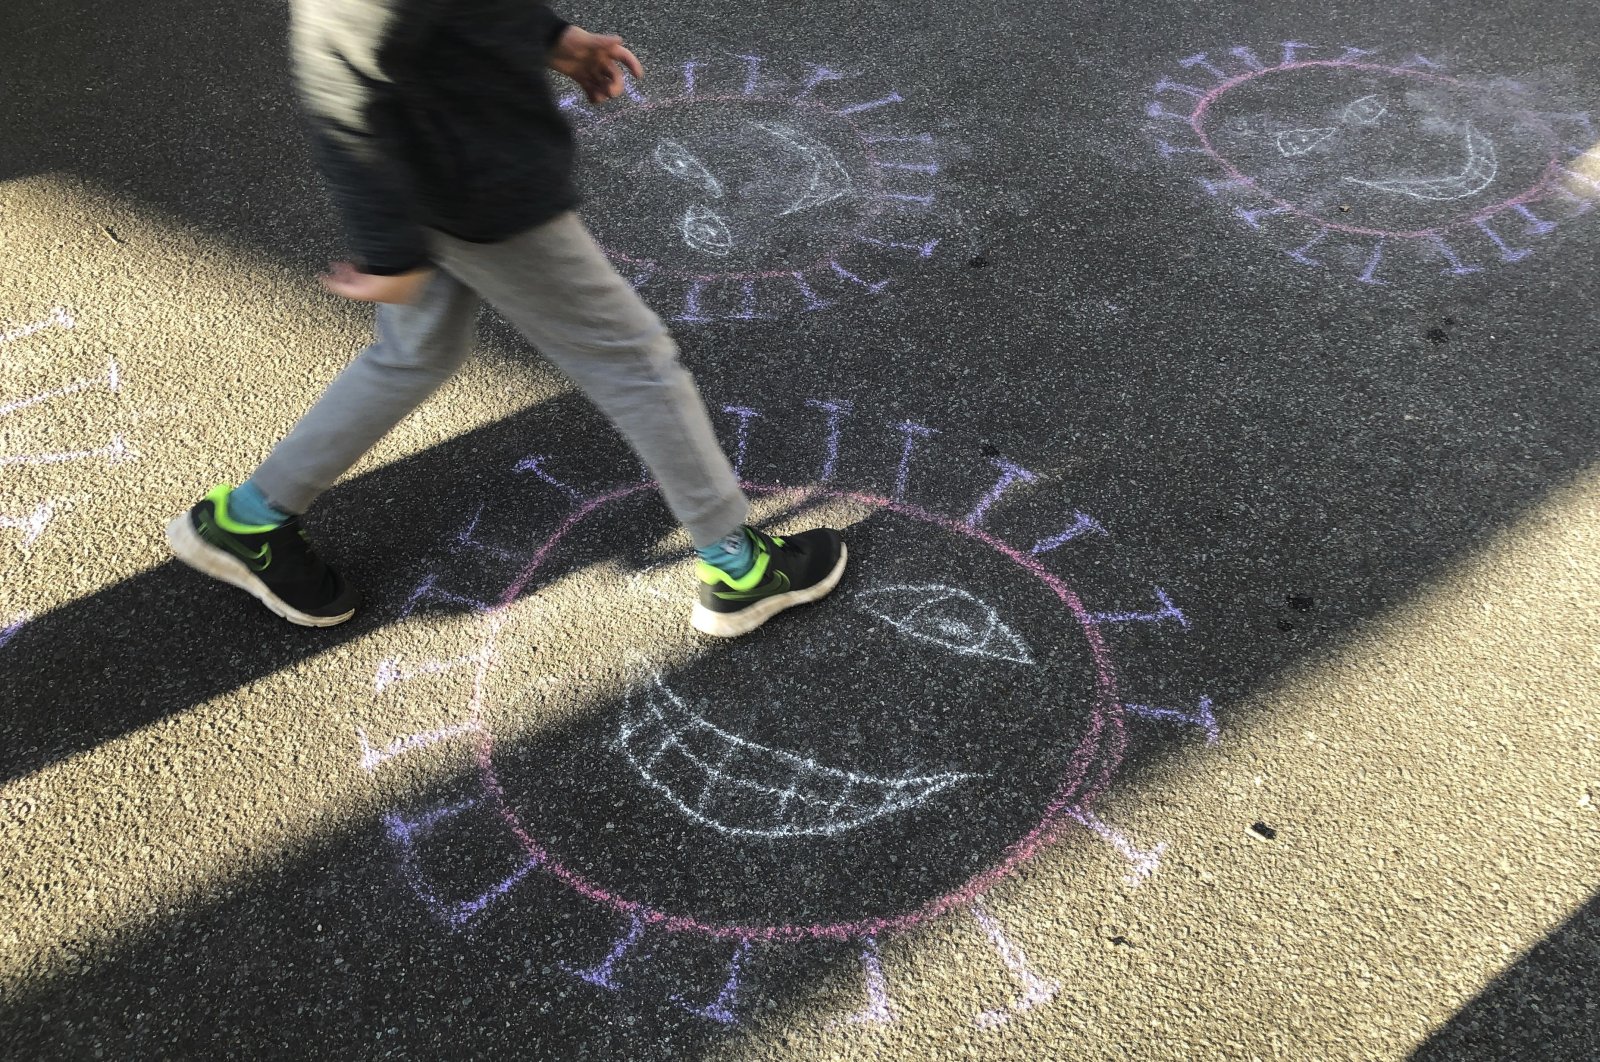 An artistic crayon depiction of the coronavirus painted by children on a street in Berlin, Germany, April 14, 2020. (AP Photo)